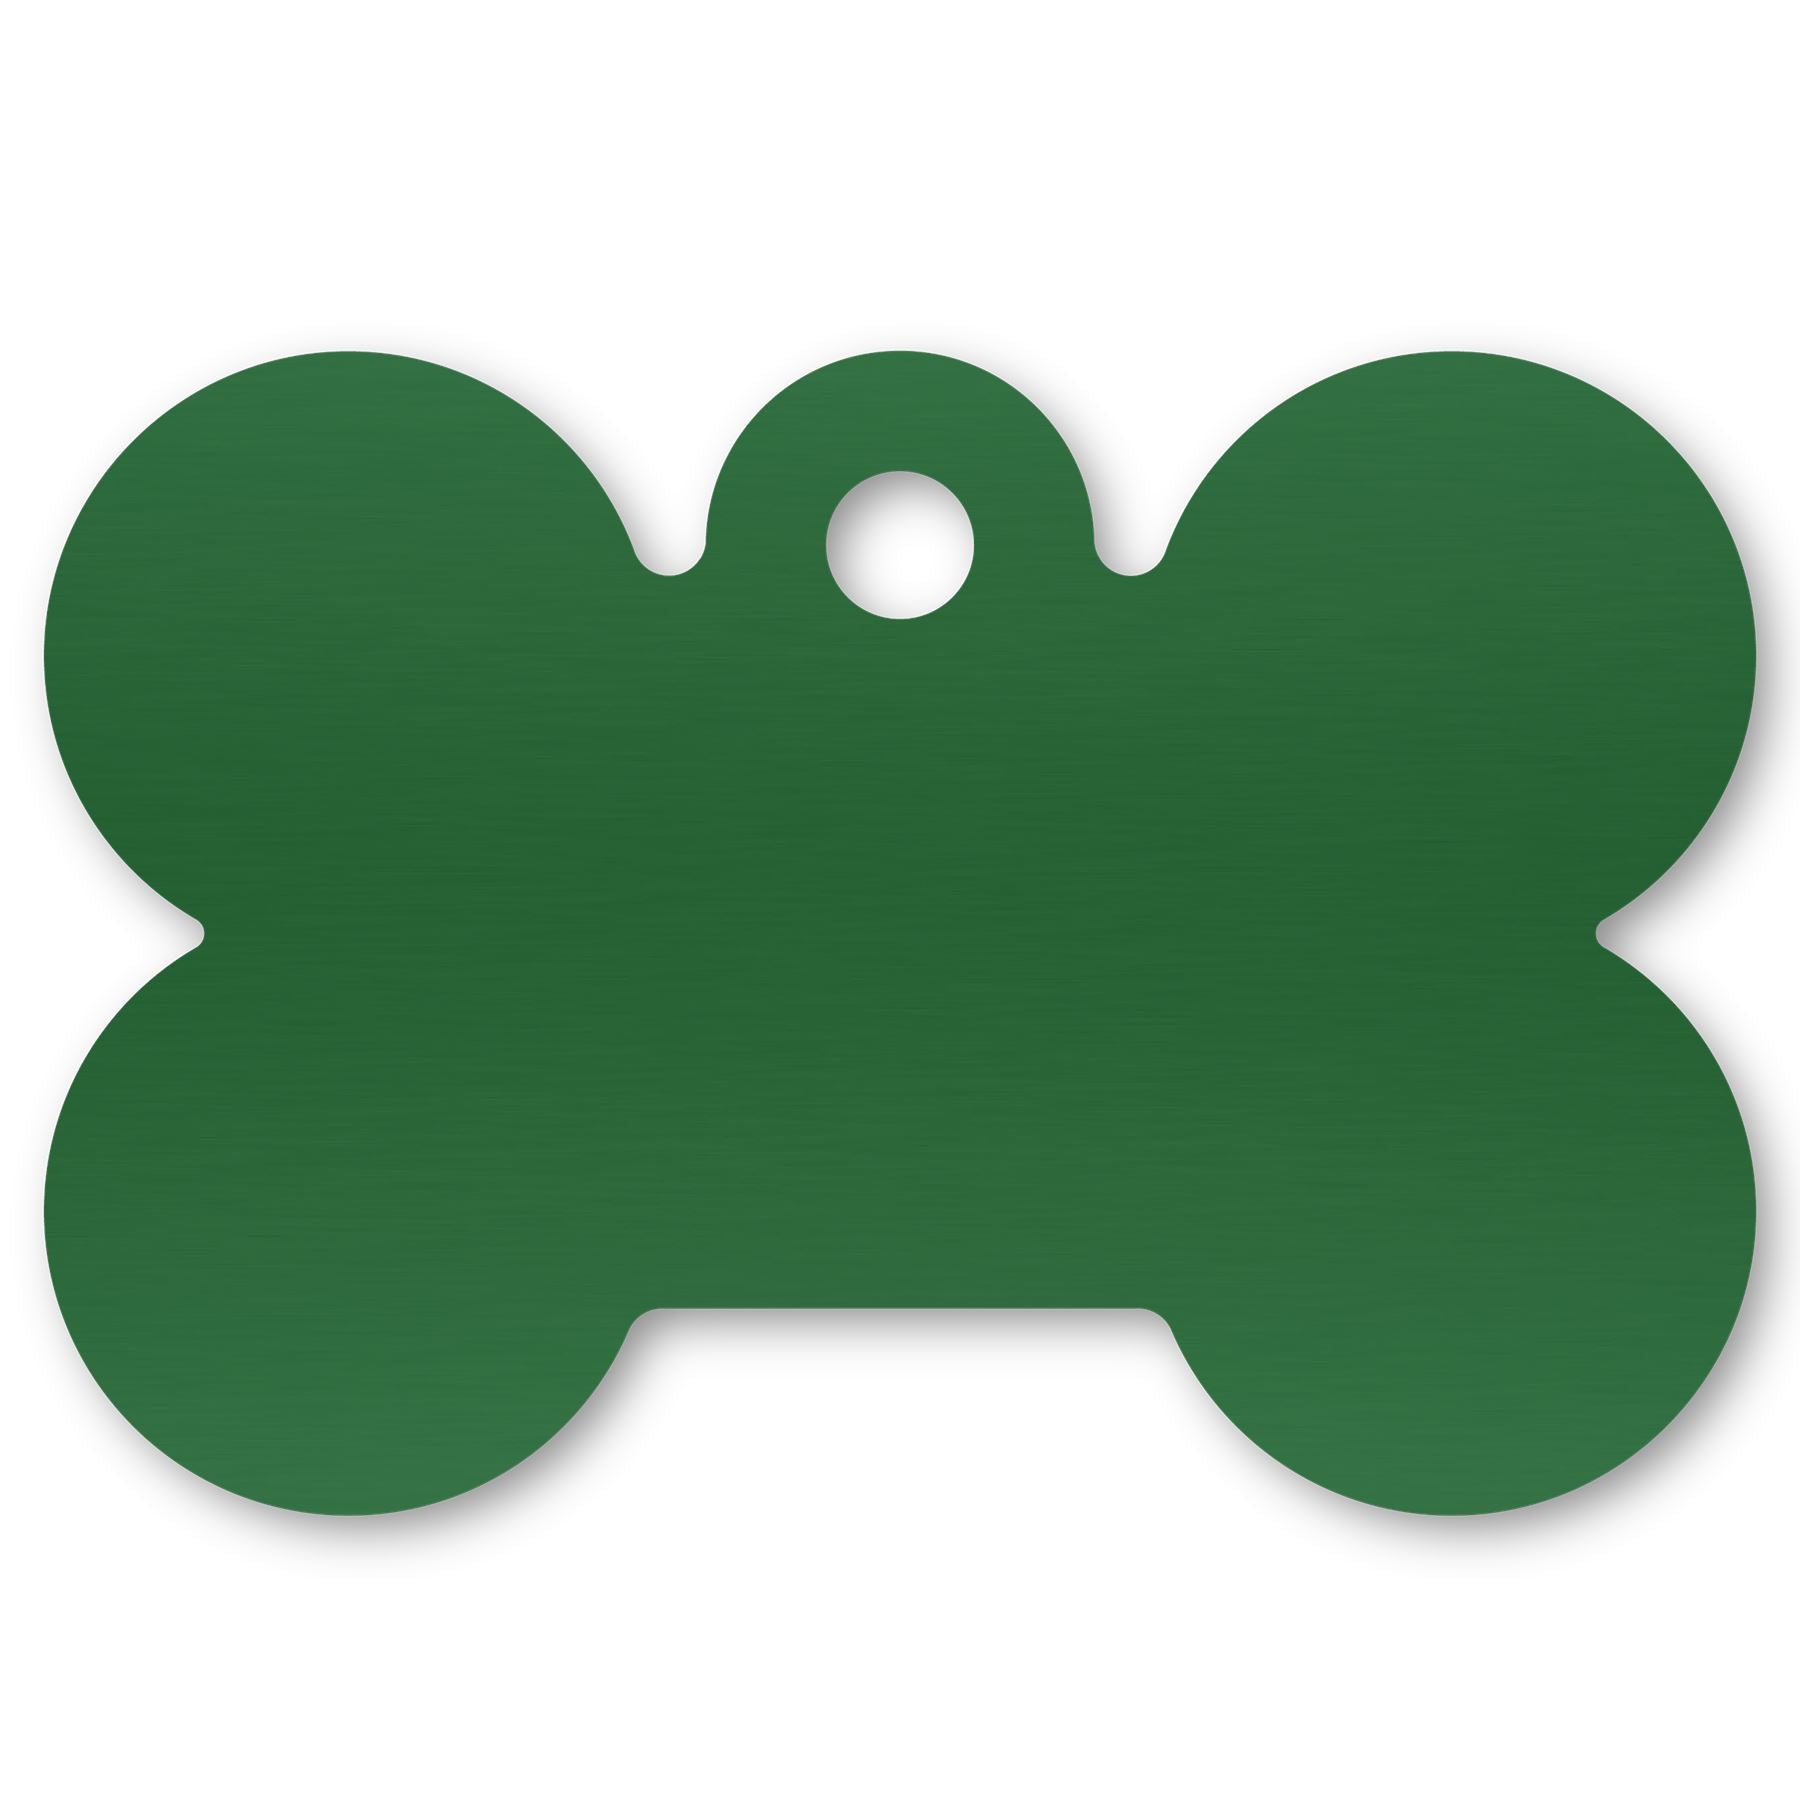 Anodized Aluminum Dog Bone Shaped Tags, 1-1/16" x 1-9/16" with 1/8" Hole, Laser Engraved Metal Tags Craftworks NW Green 